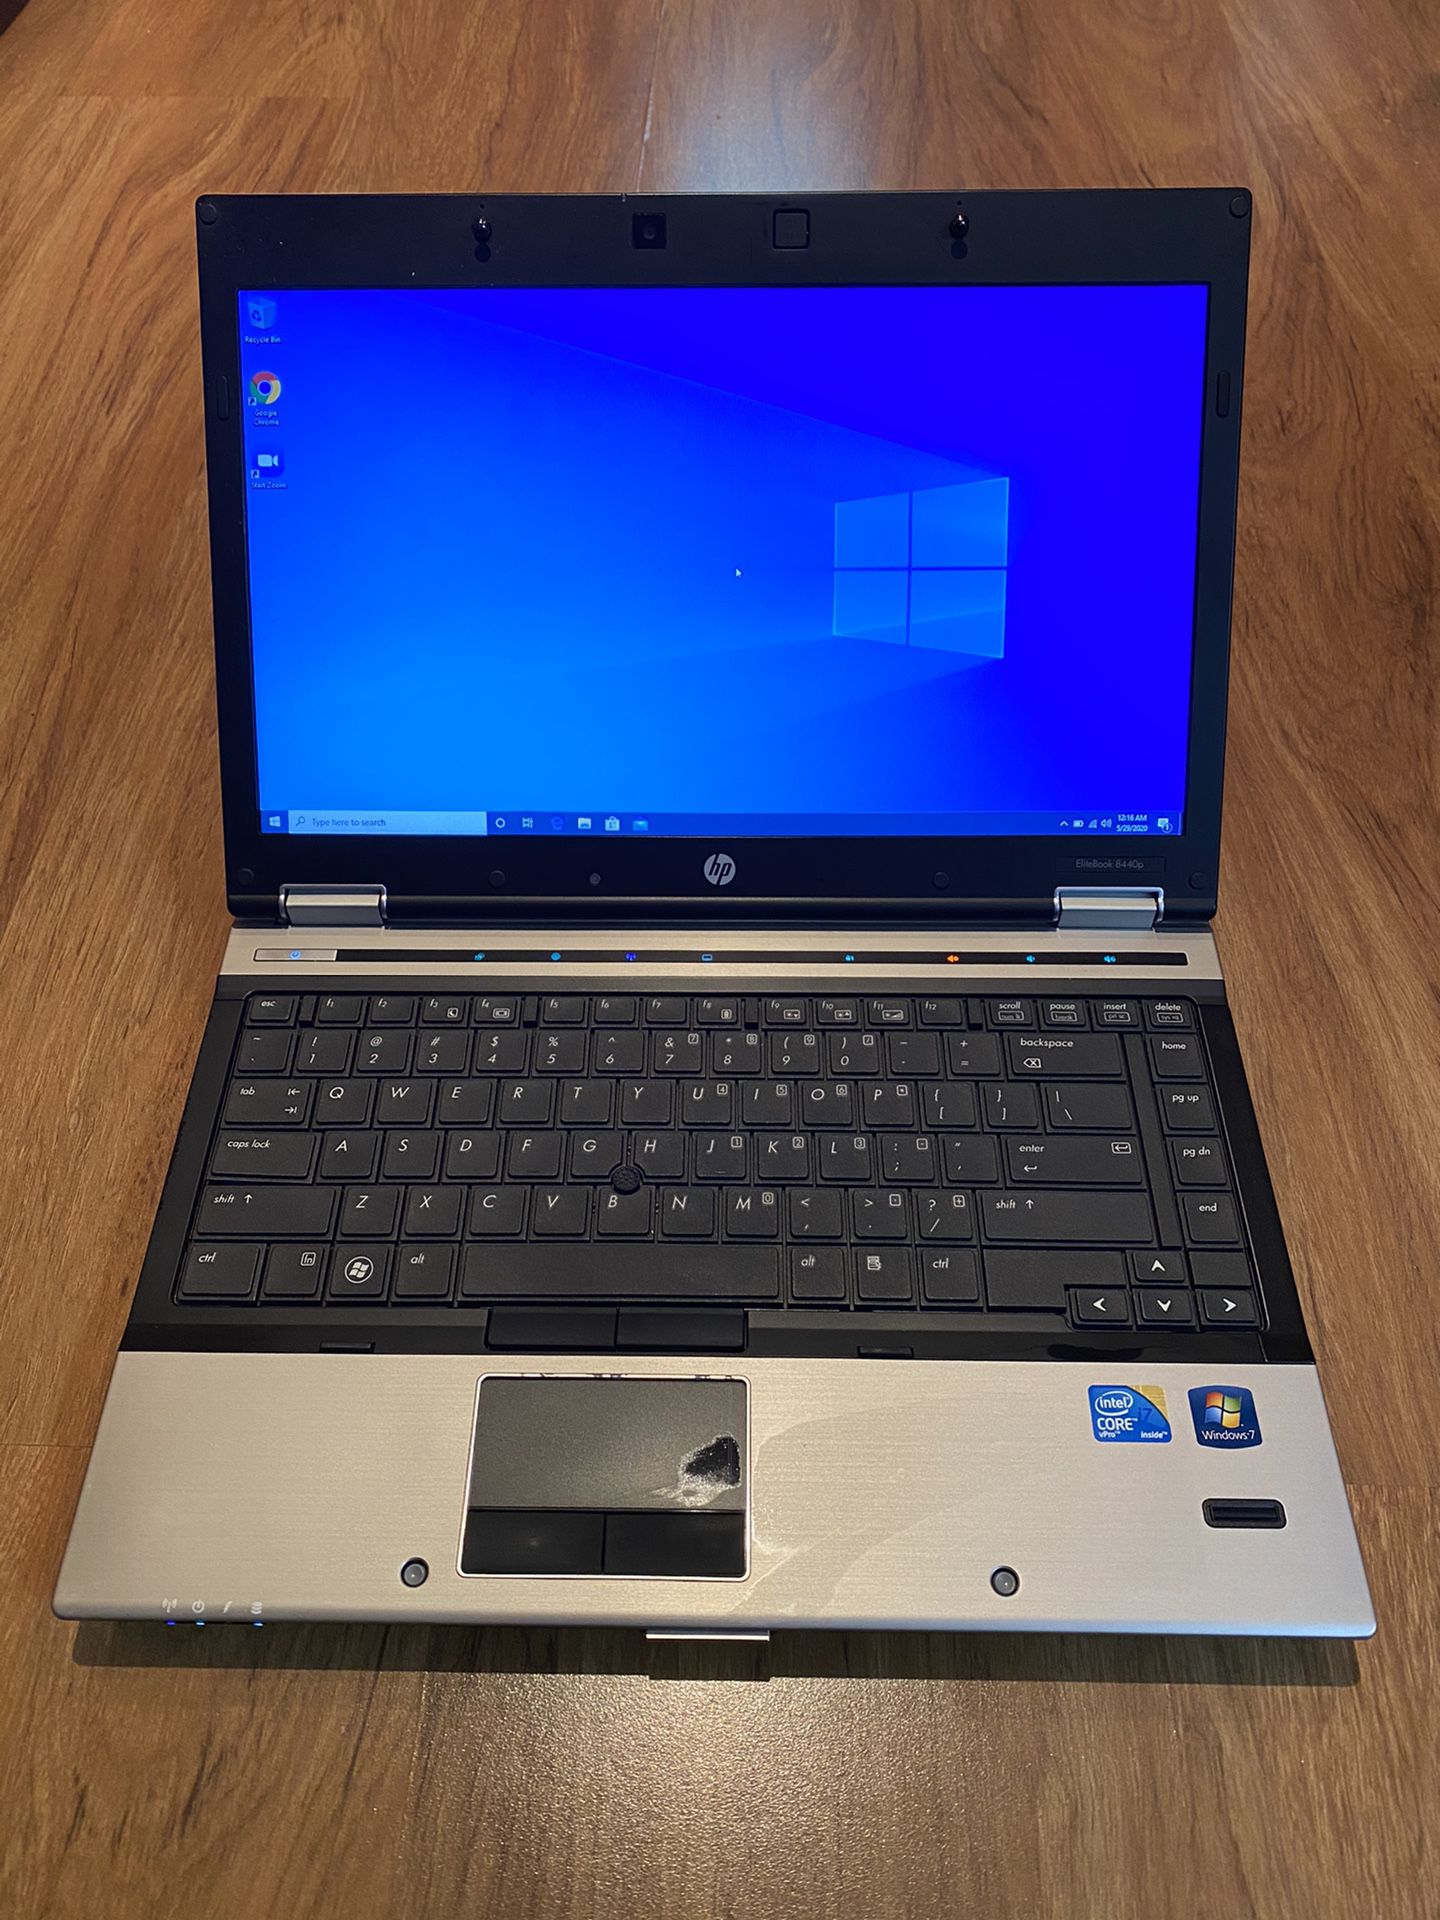 HP EliteBook 8440p core i7 8GB Ram 500GB Hard Drive 14.1 inch Screen Windows 10 Pro Laptop with charger in Excellent Working condition!!!!!!!